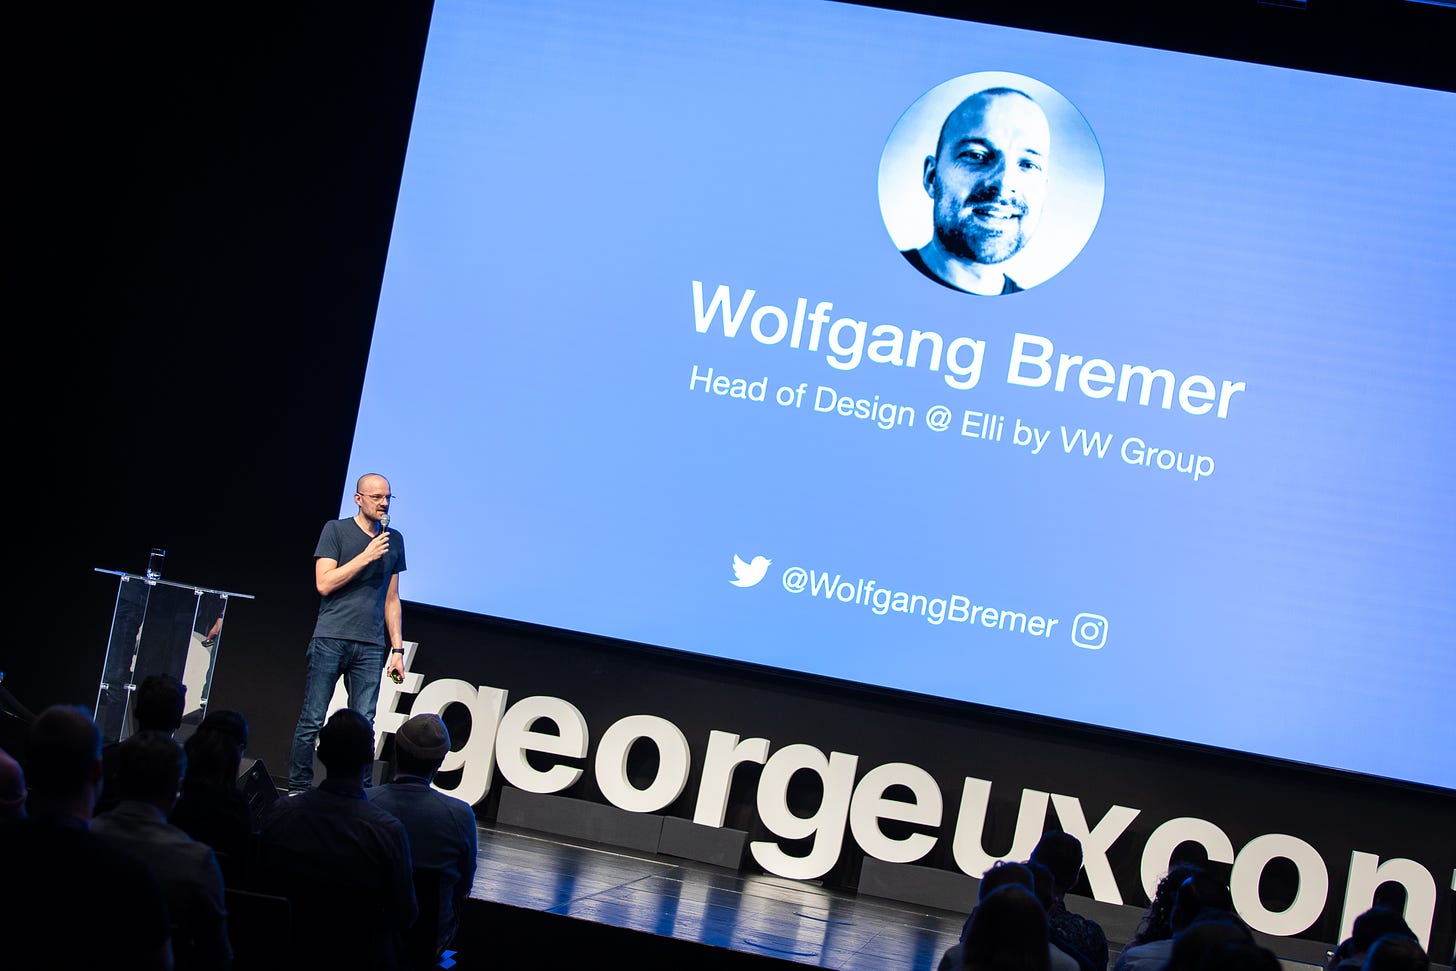 Wolfgang Bremer is giving his talk “Human Centered Design Leadership” at the George UX Conference 2022 in Vienna, Austria